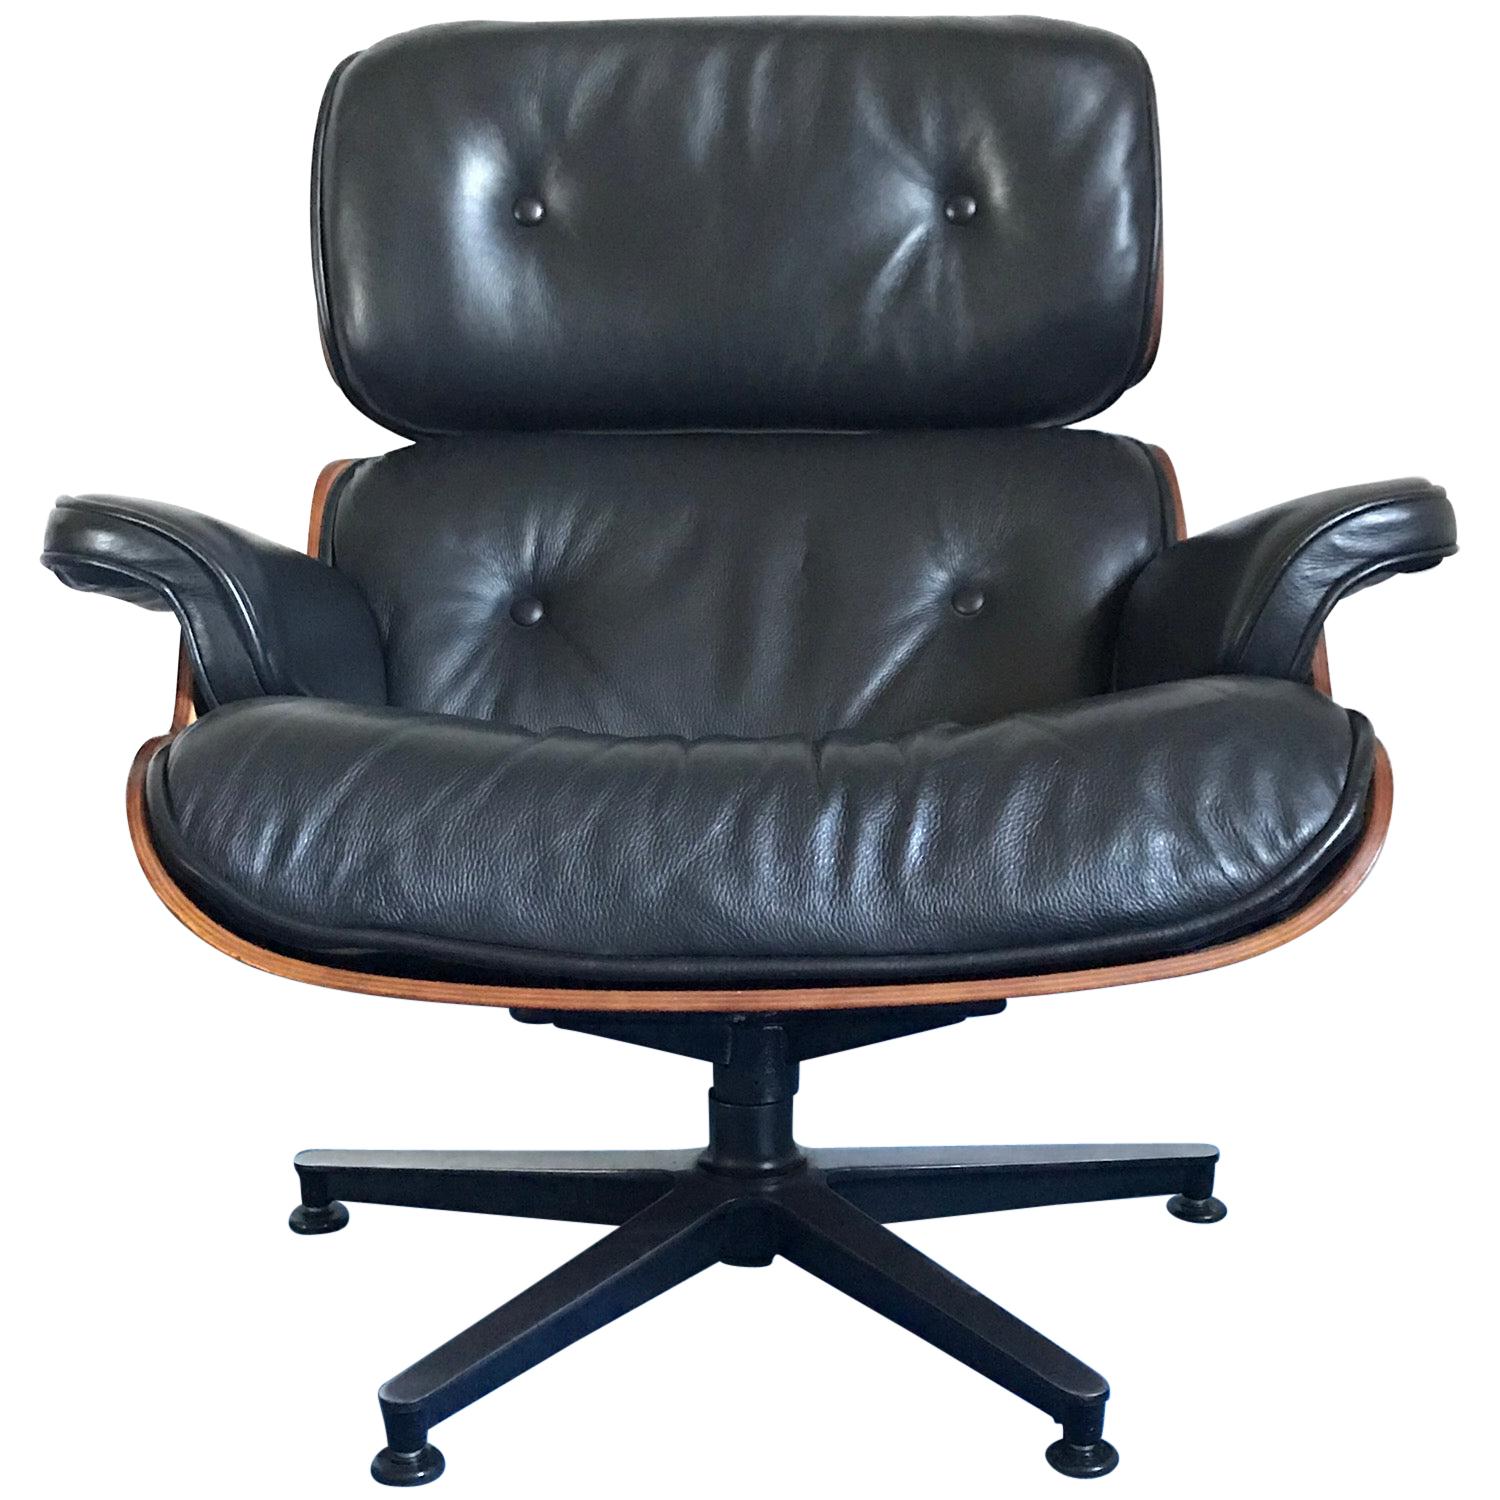 Charles Ray Eames Lounge Chair 670, Black Leather